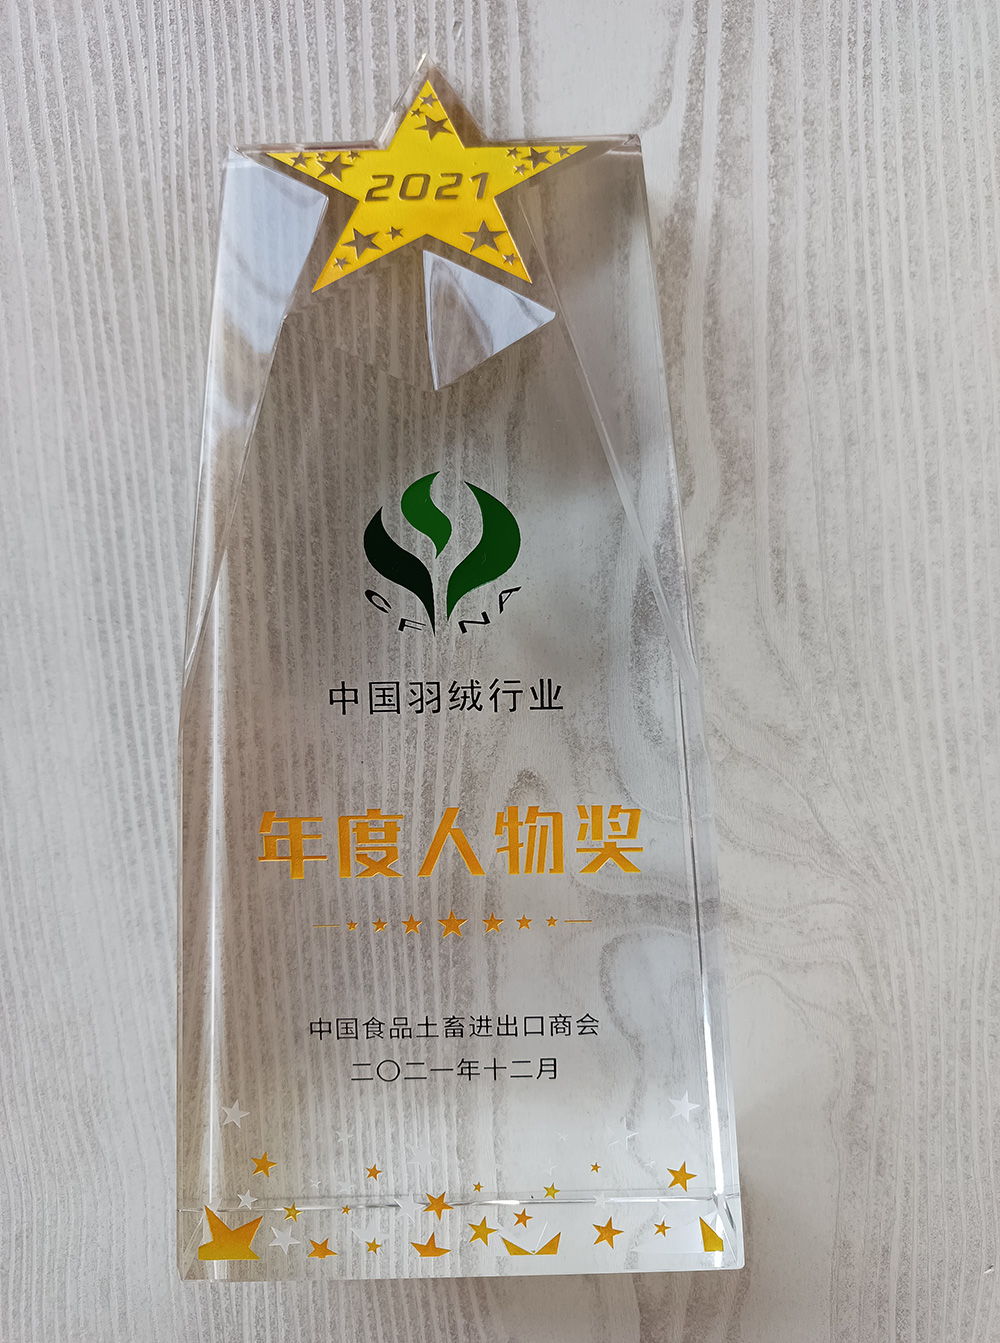 China Down Industry Person of the Year Award